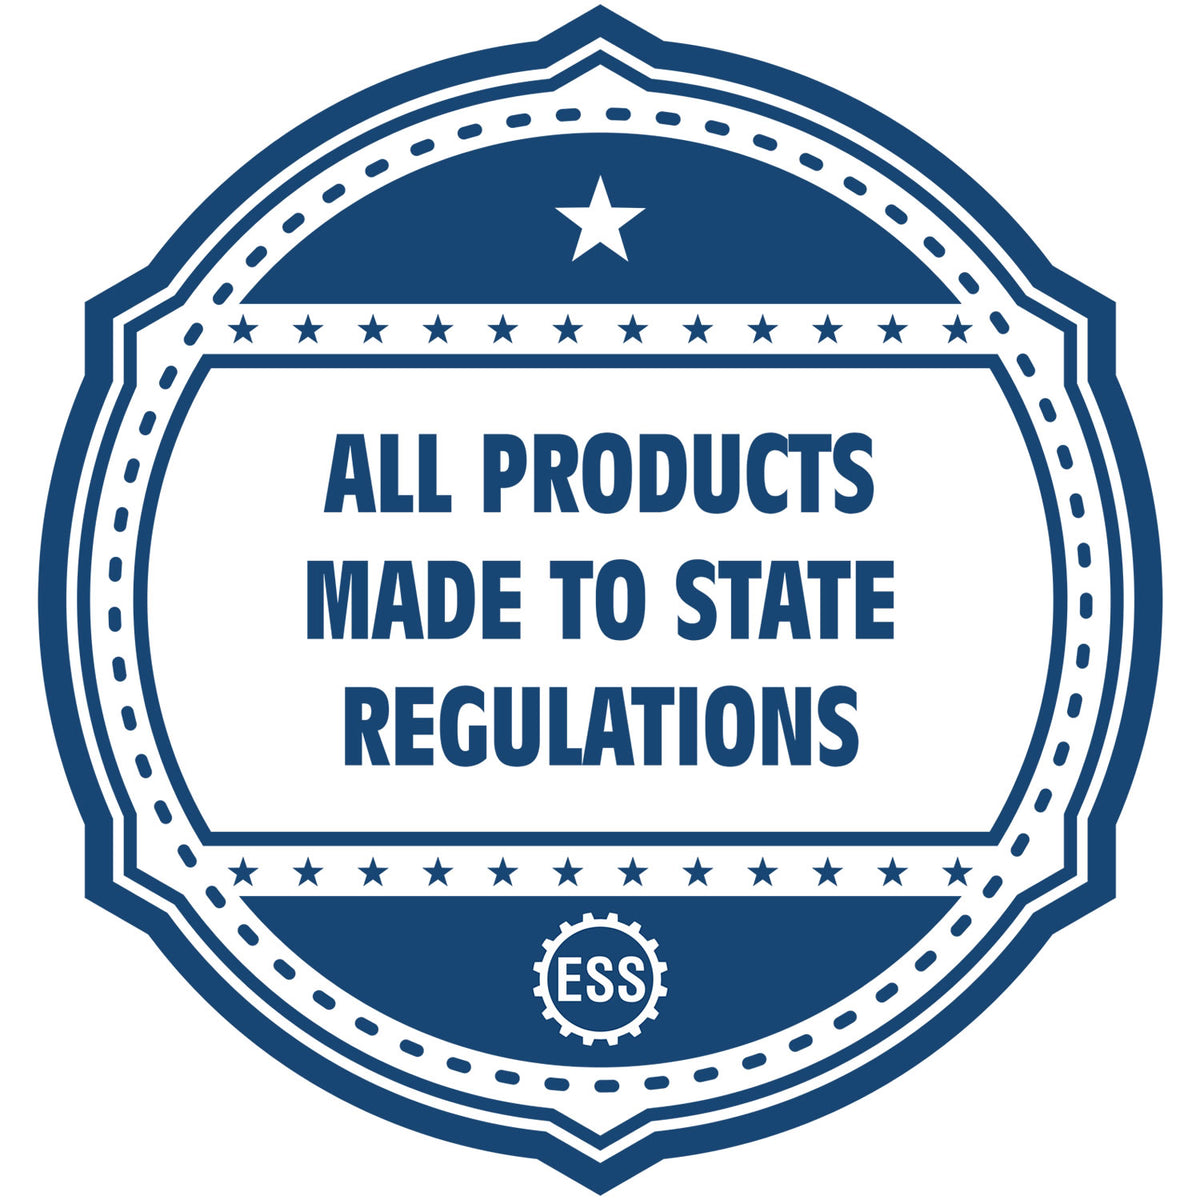 An icon or badge element for the Nebraska Landscape Architectural Seal Stamp showing that this product is made in compliance with state regulations.